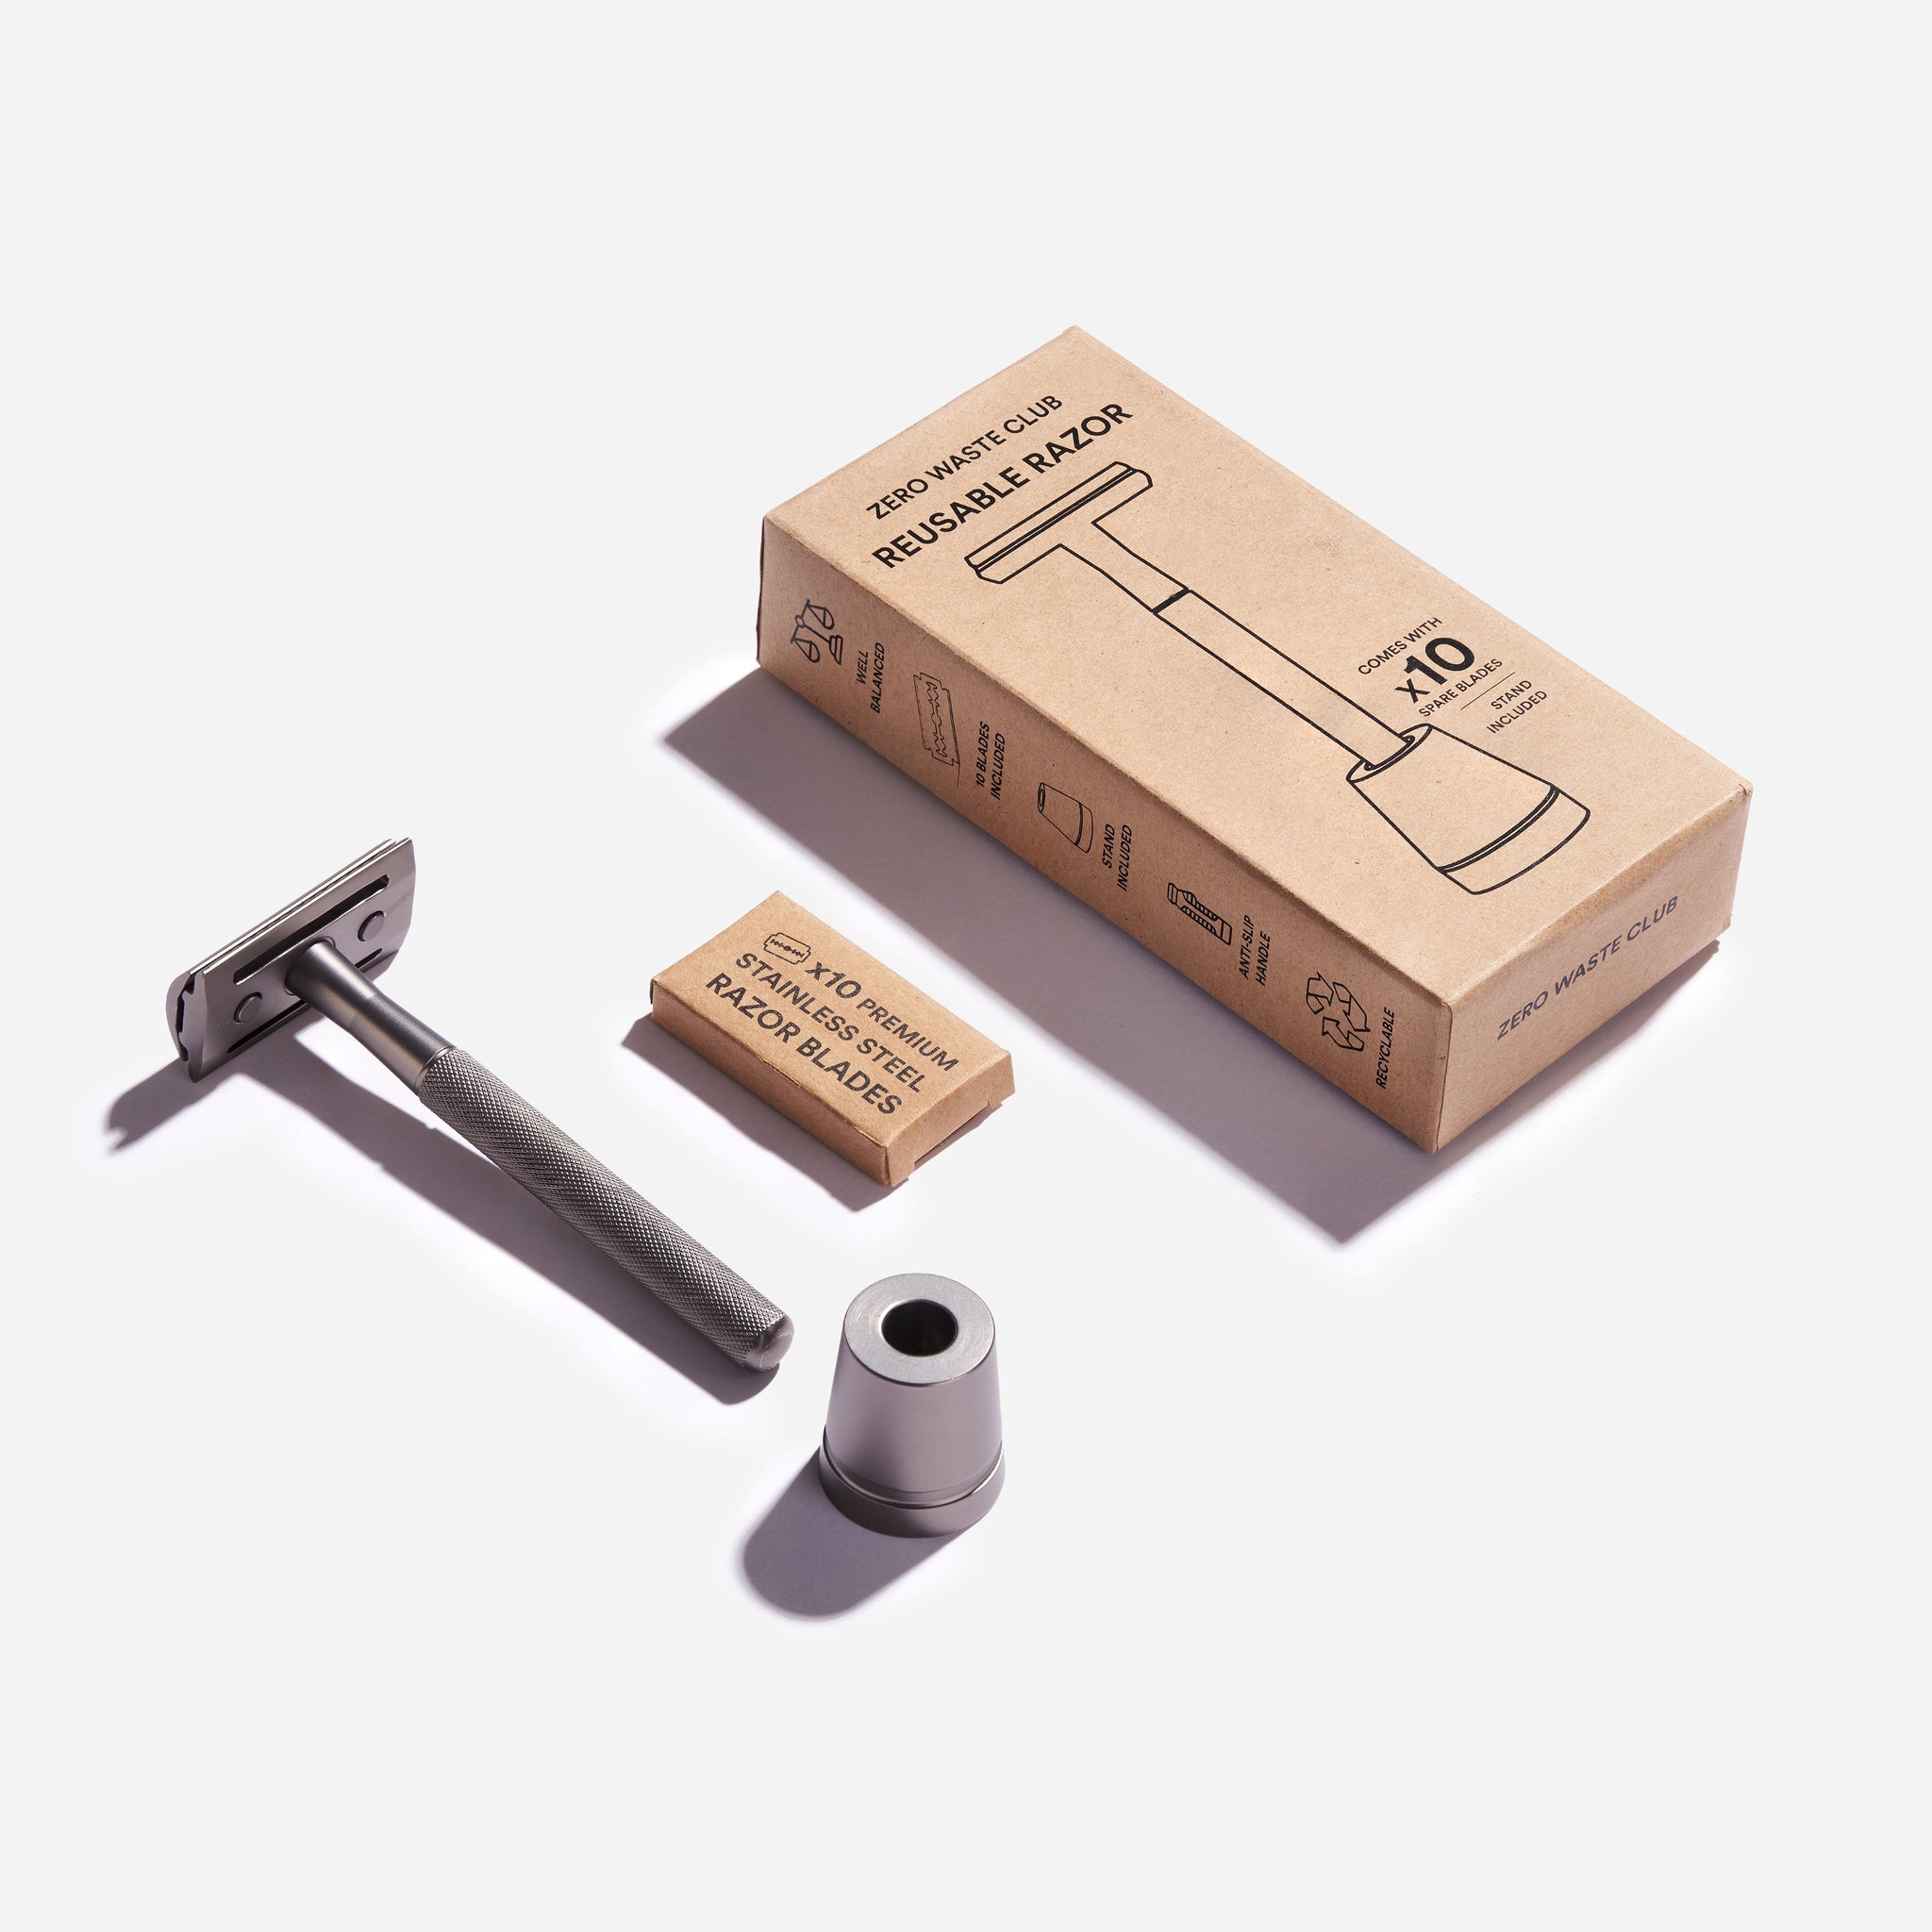 Reusable Safety Razor with Stand - 10 Blades Included